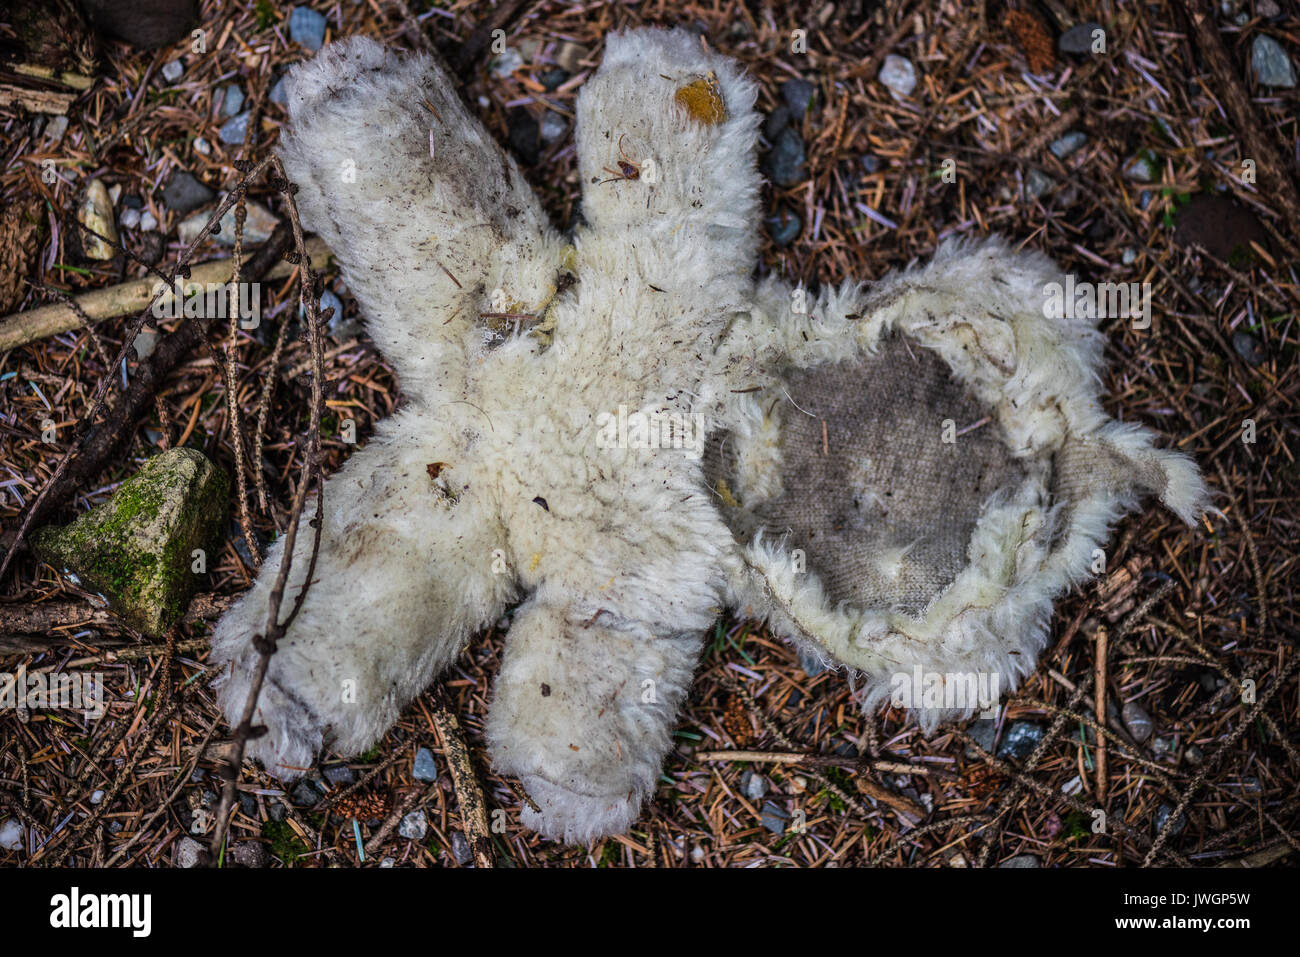 Cuddly toy in woods with face ripped off. Stock Photo